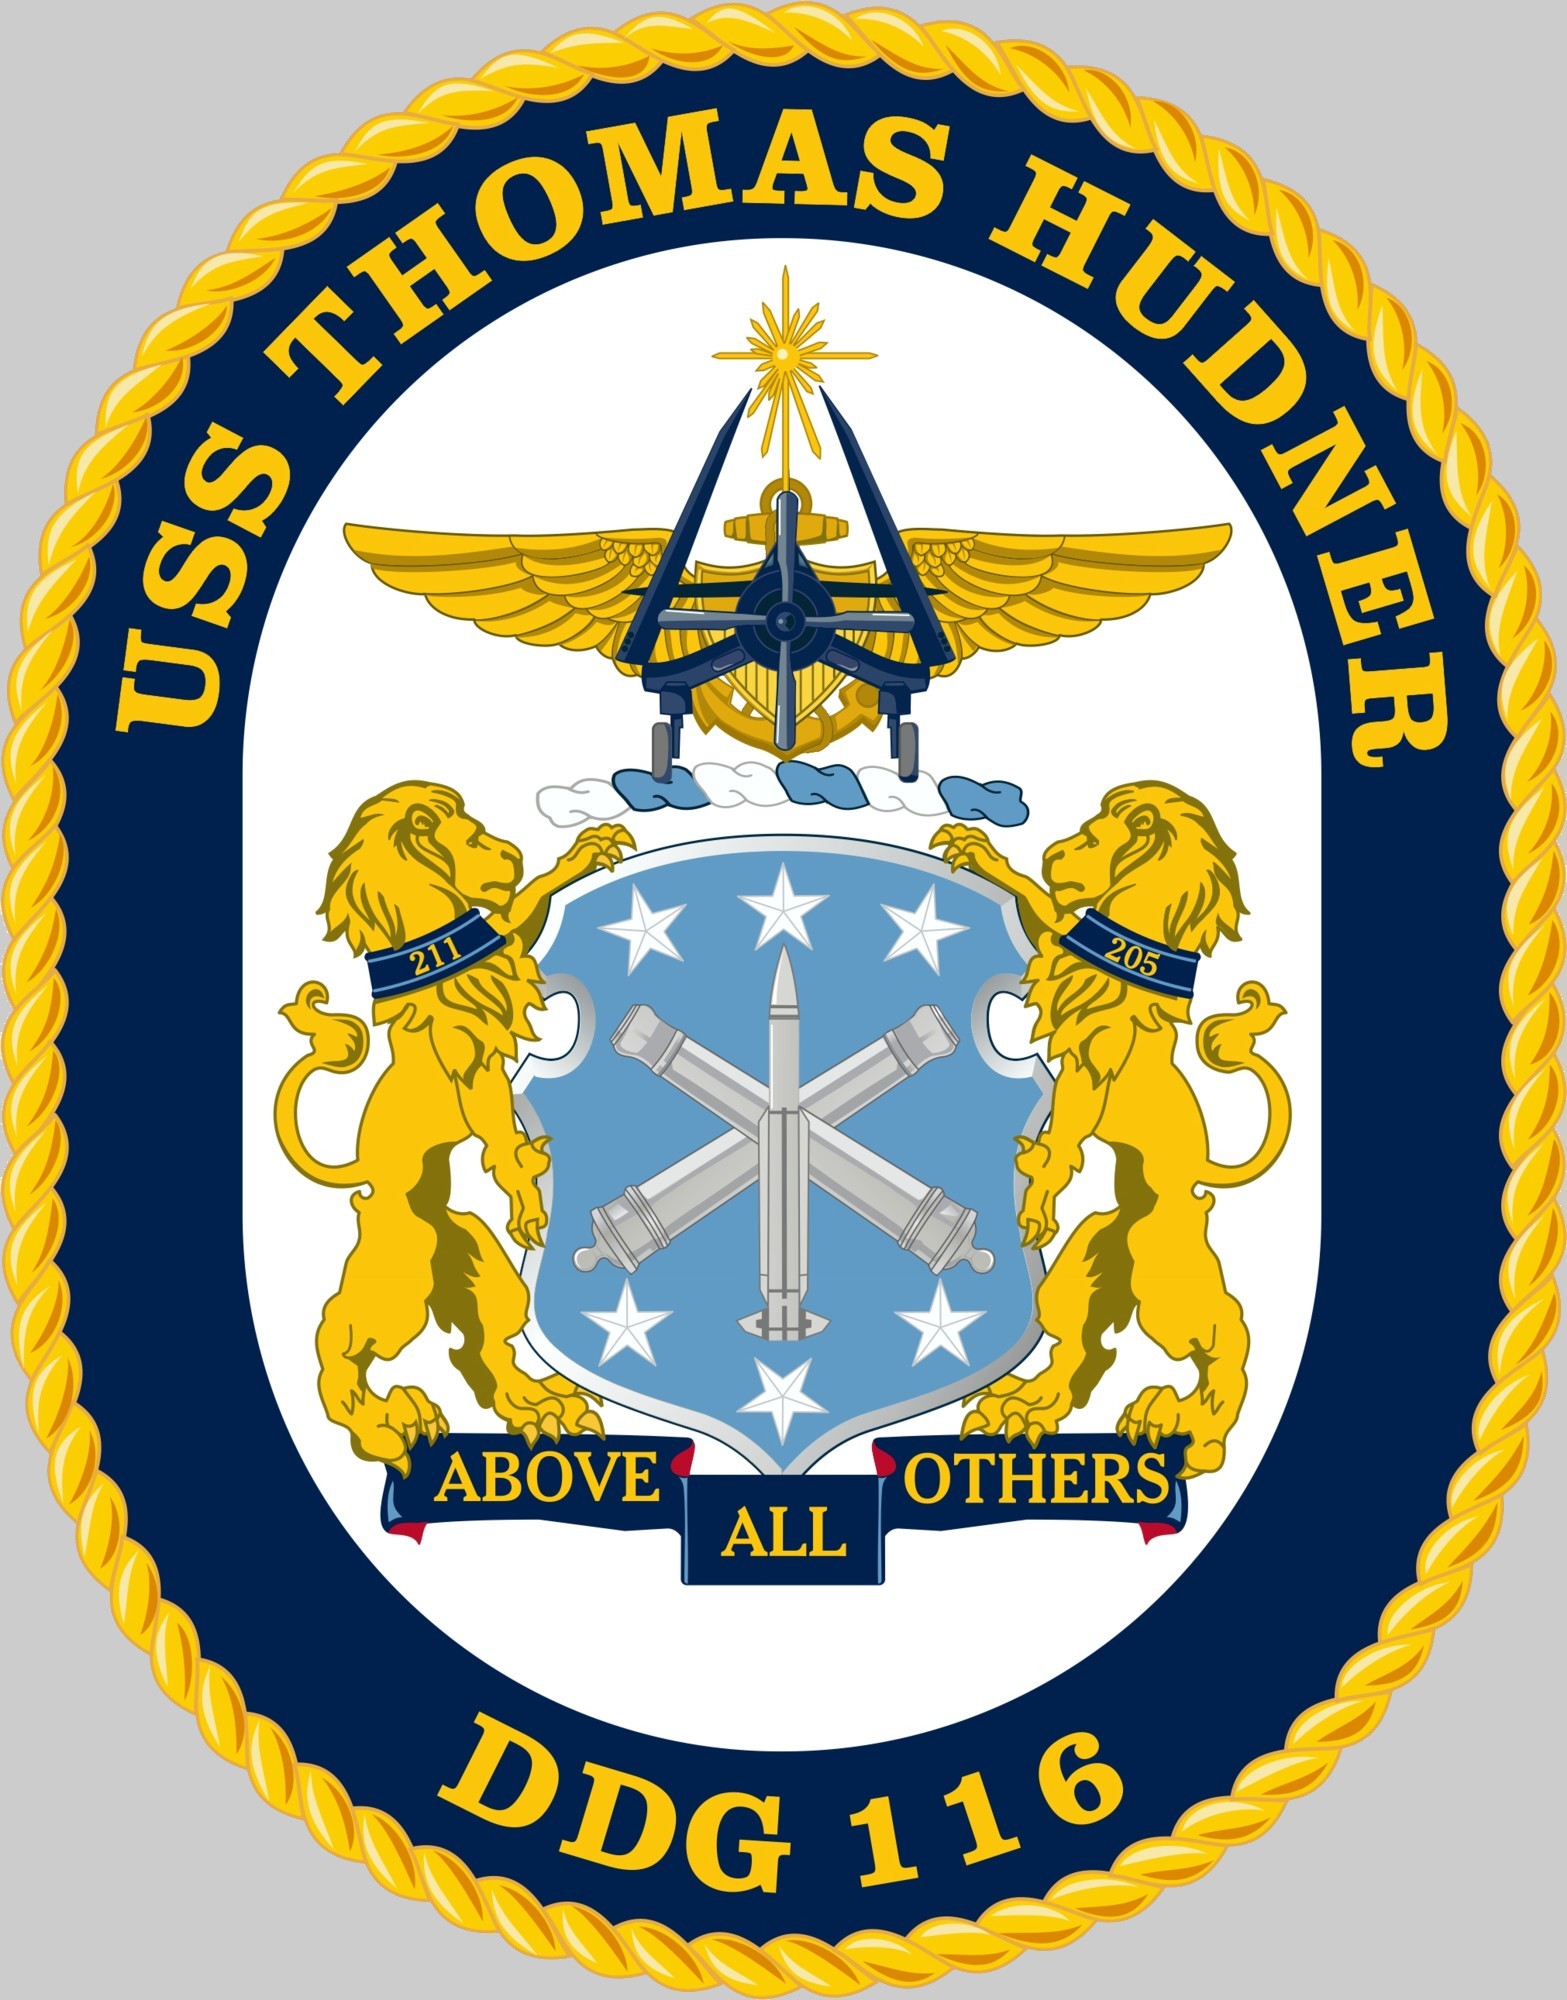 ddg-116 uss thomas hudner insignia crest patch badge arleigh burke class guided missile destroyer us navy aegis 02c